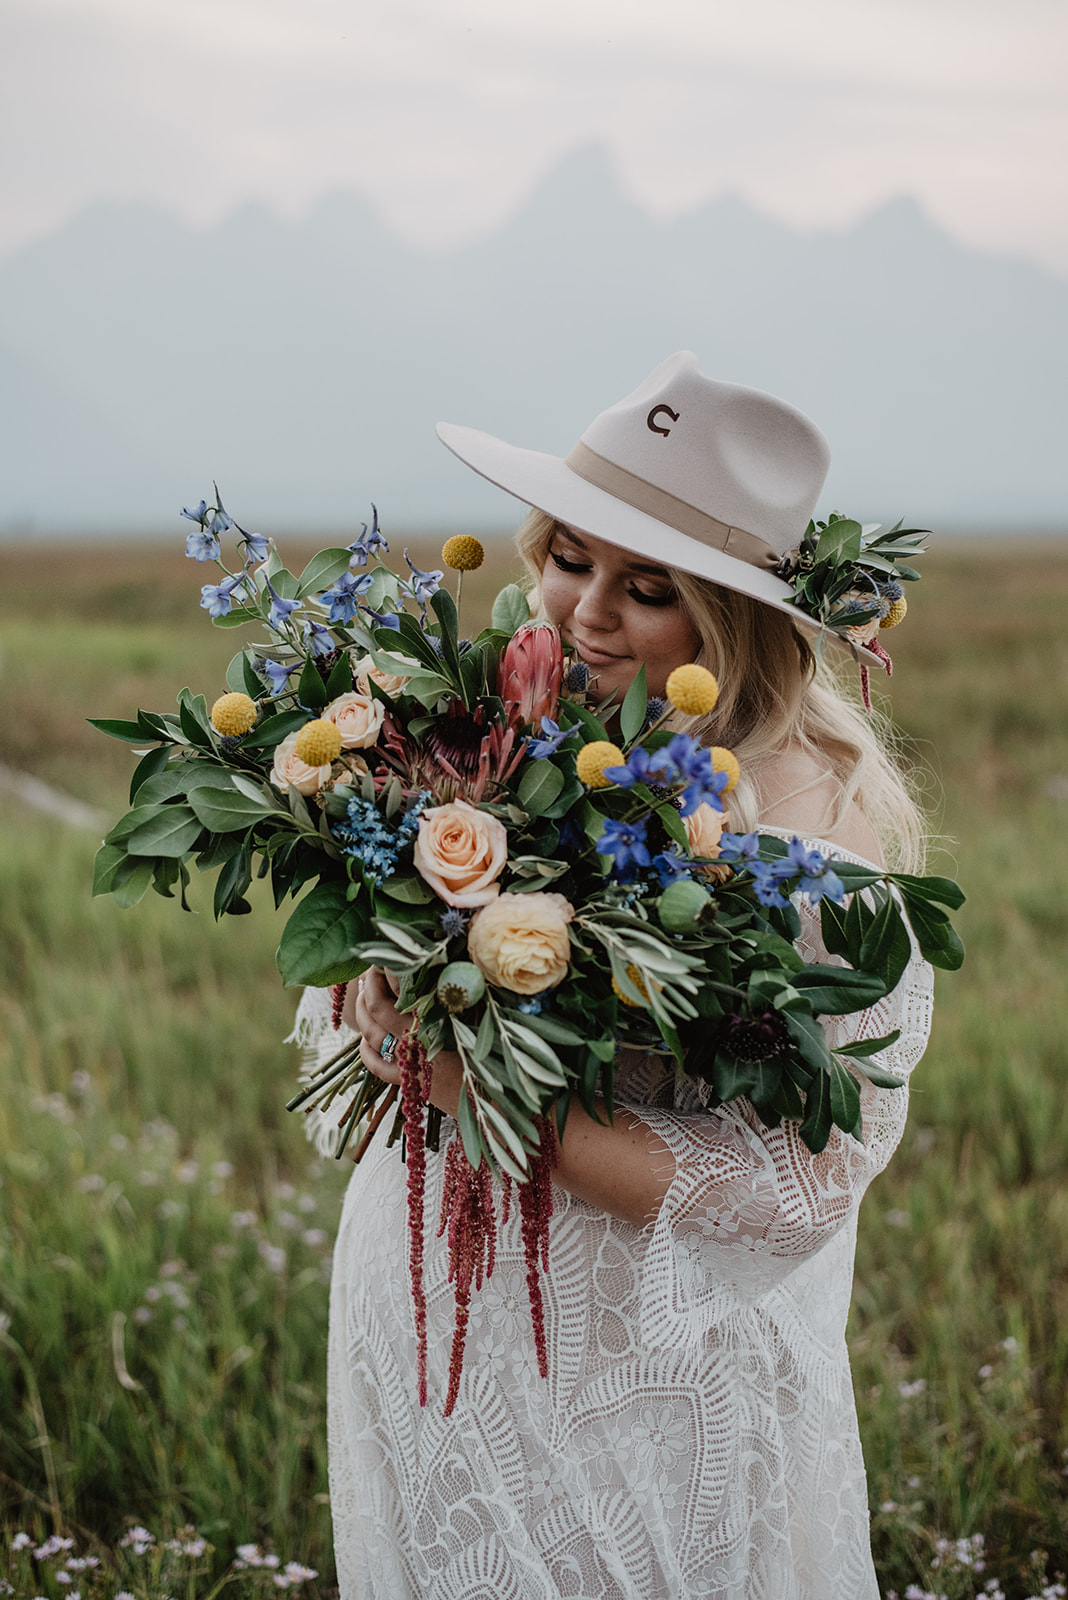 brides holding her wedding flowers up to her face and smelling them with the Grand Tetons behind her as she wears a boho lace wedding dress and a tan hat